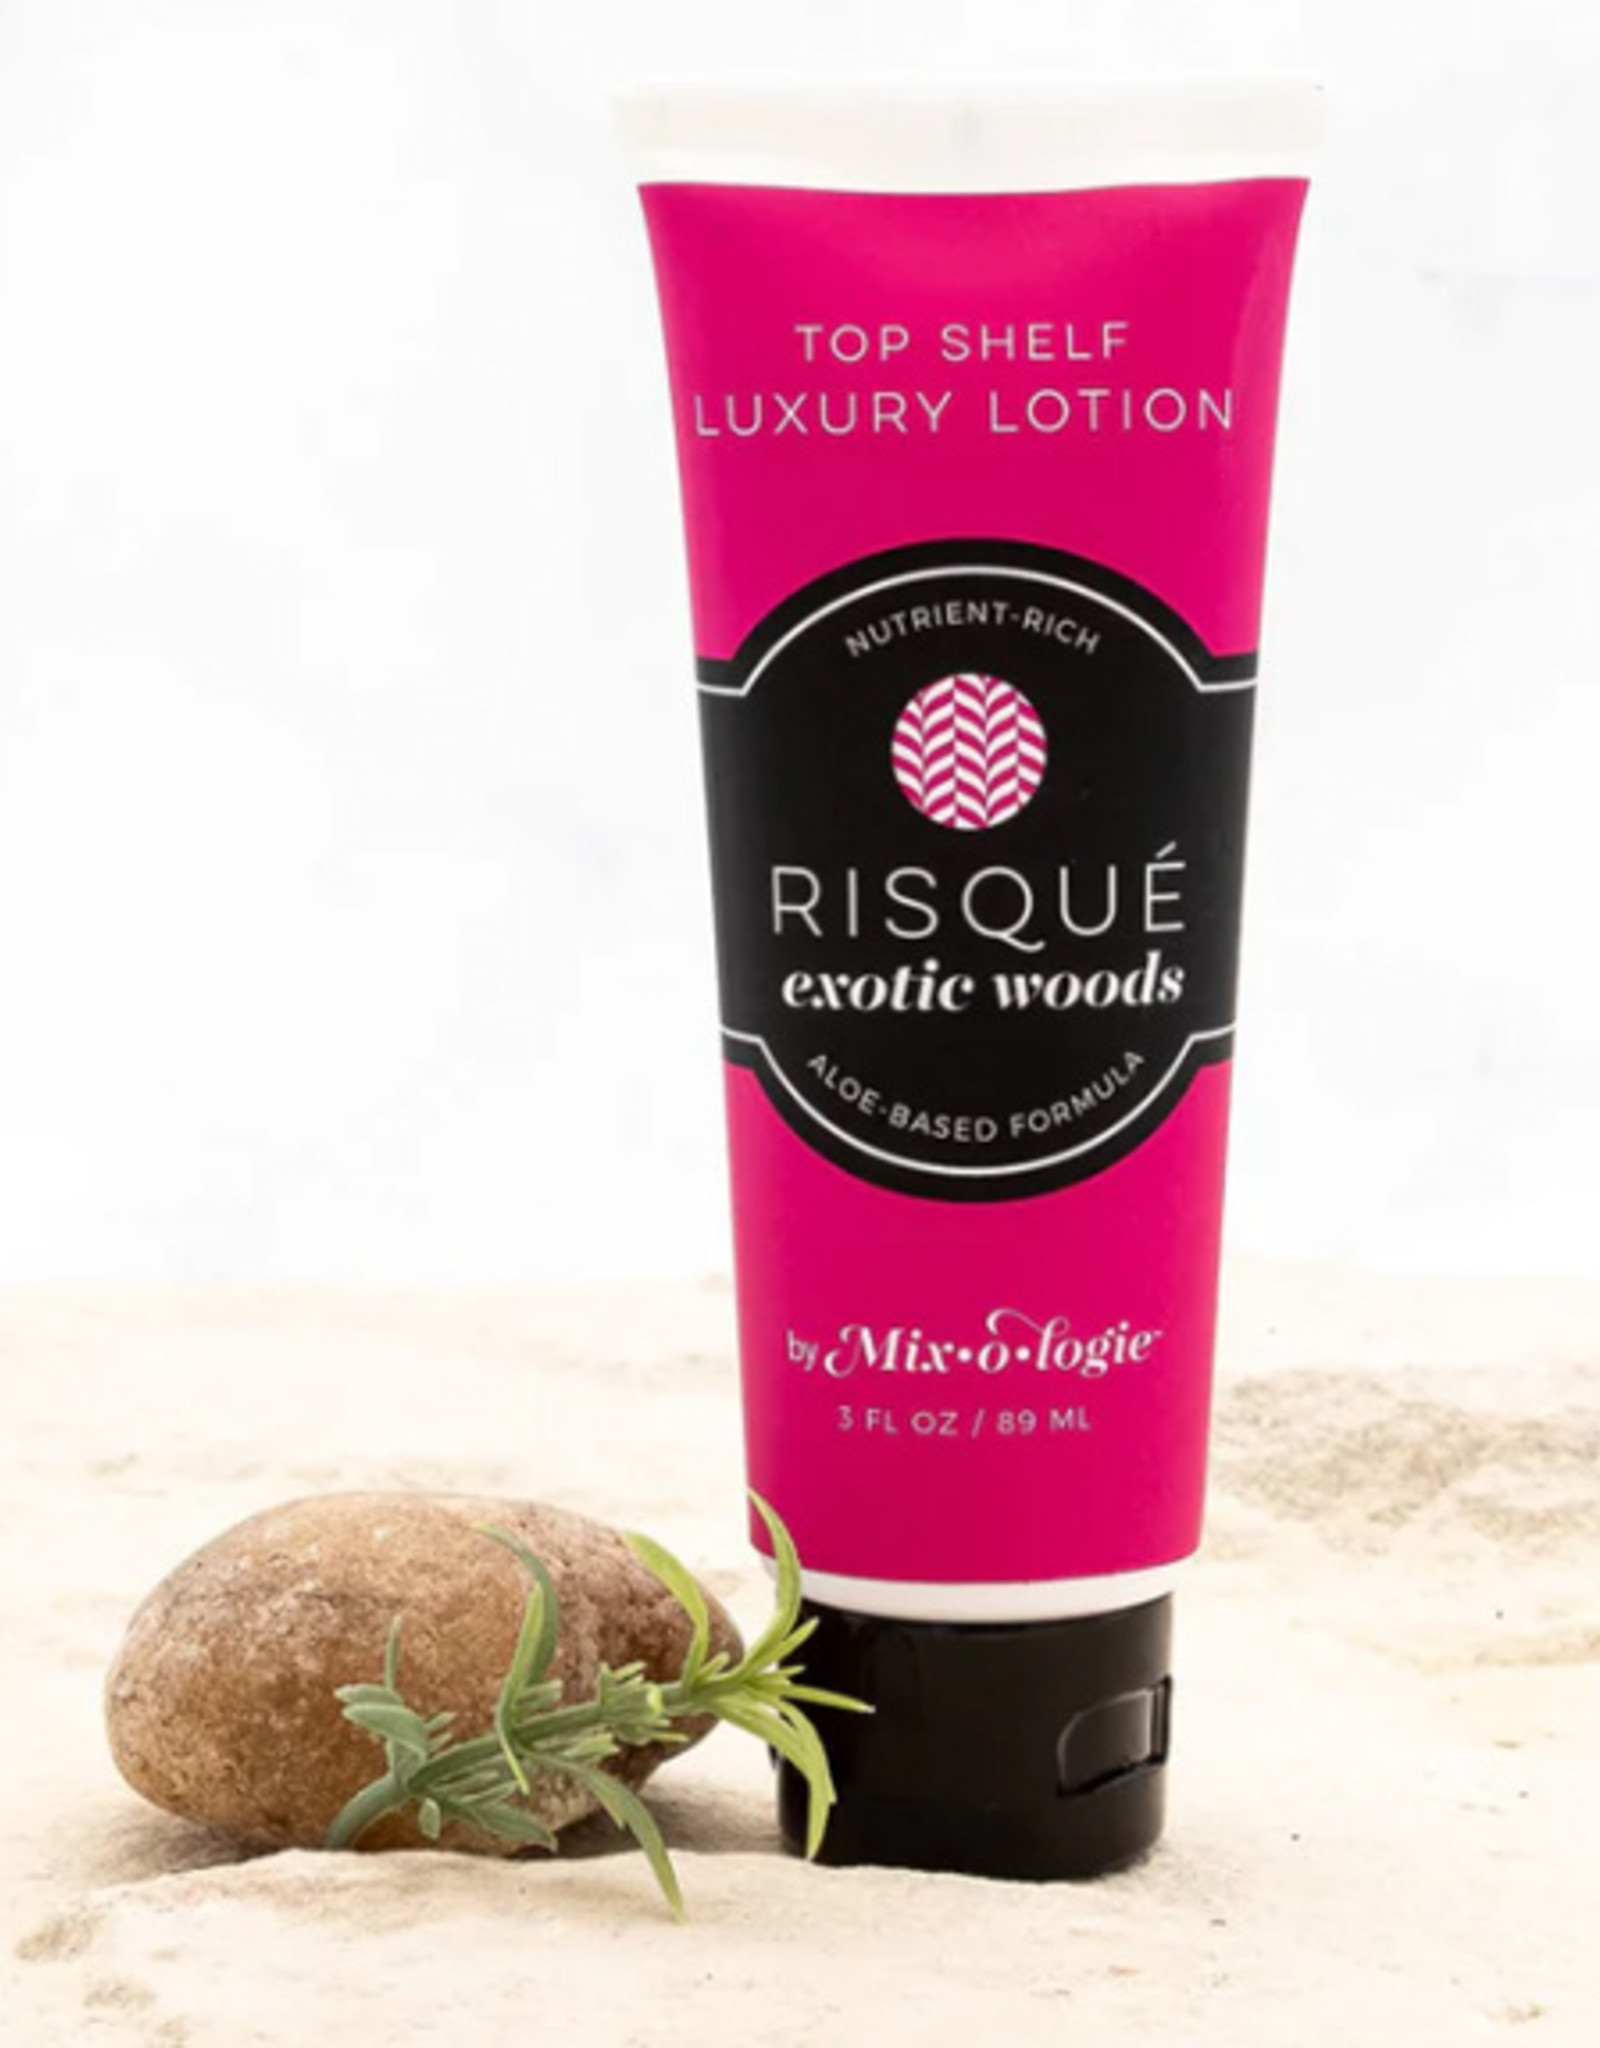 RISQUE - Exotic Wood Top Shelf Luxury Lotion